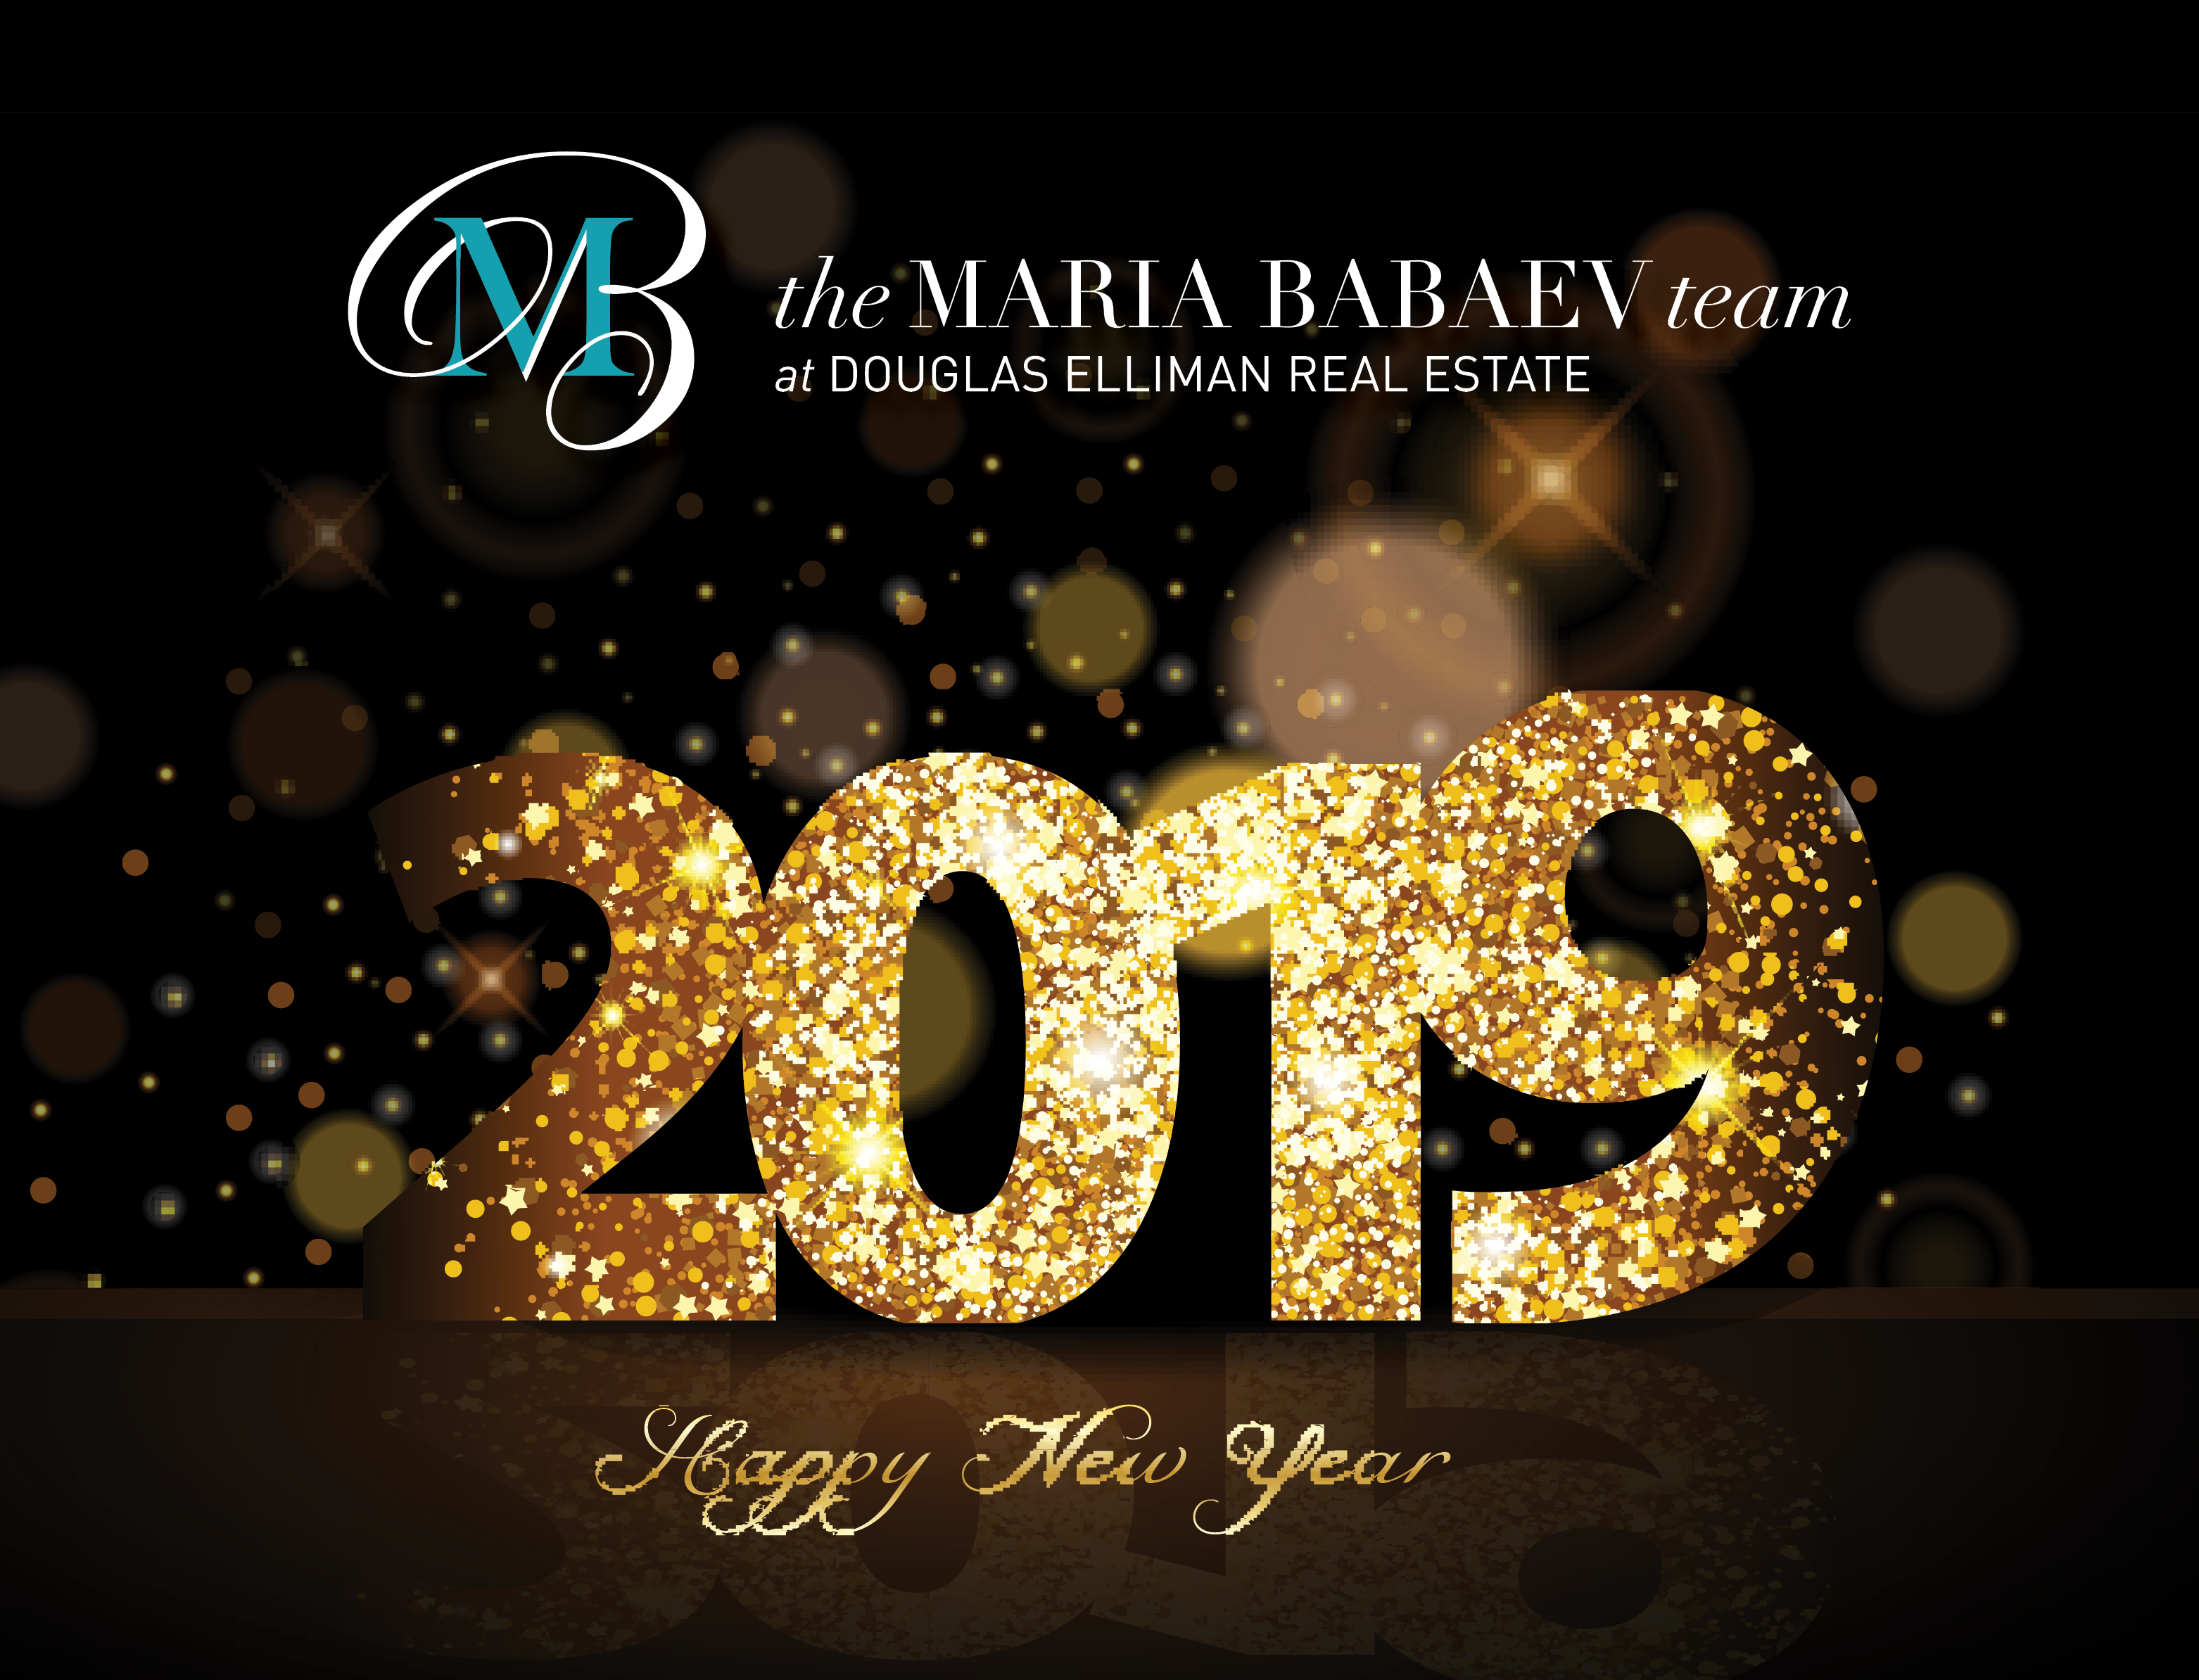 Happy New Year From The Maria Babaev Team!